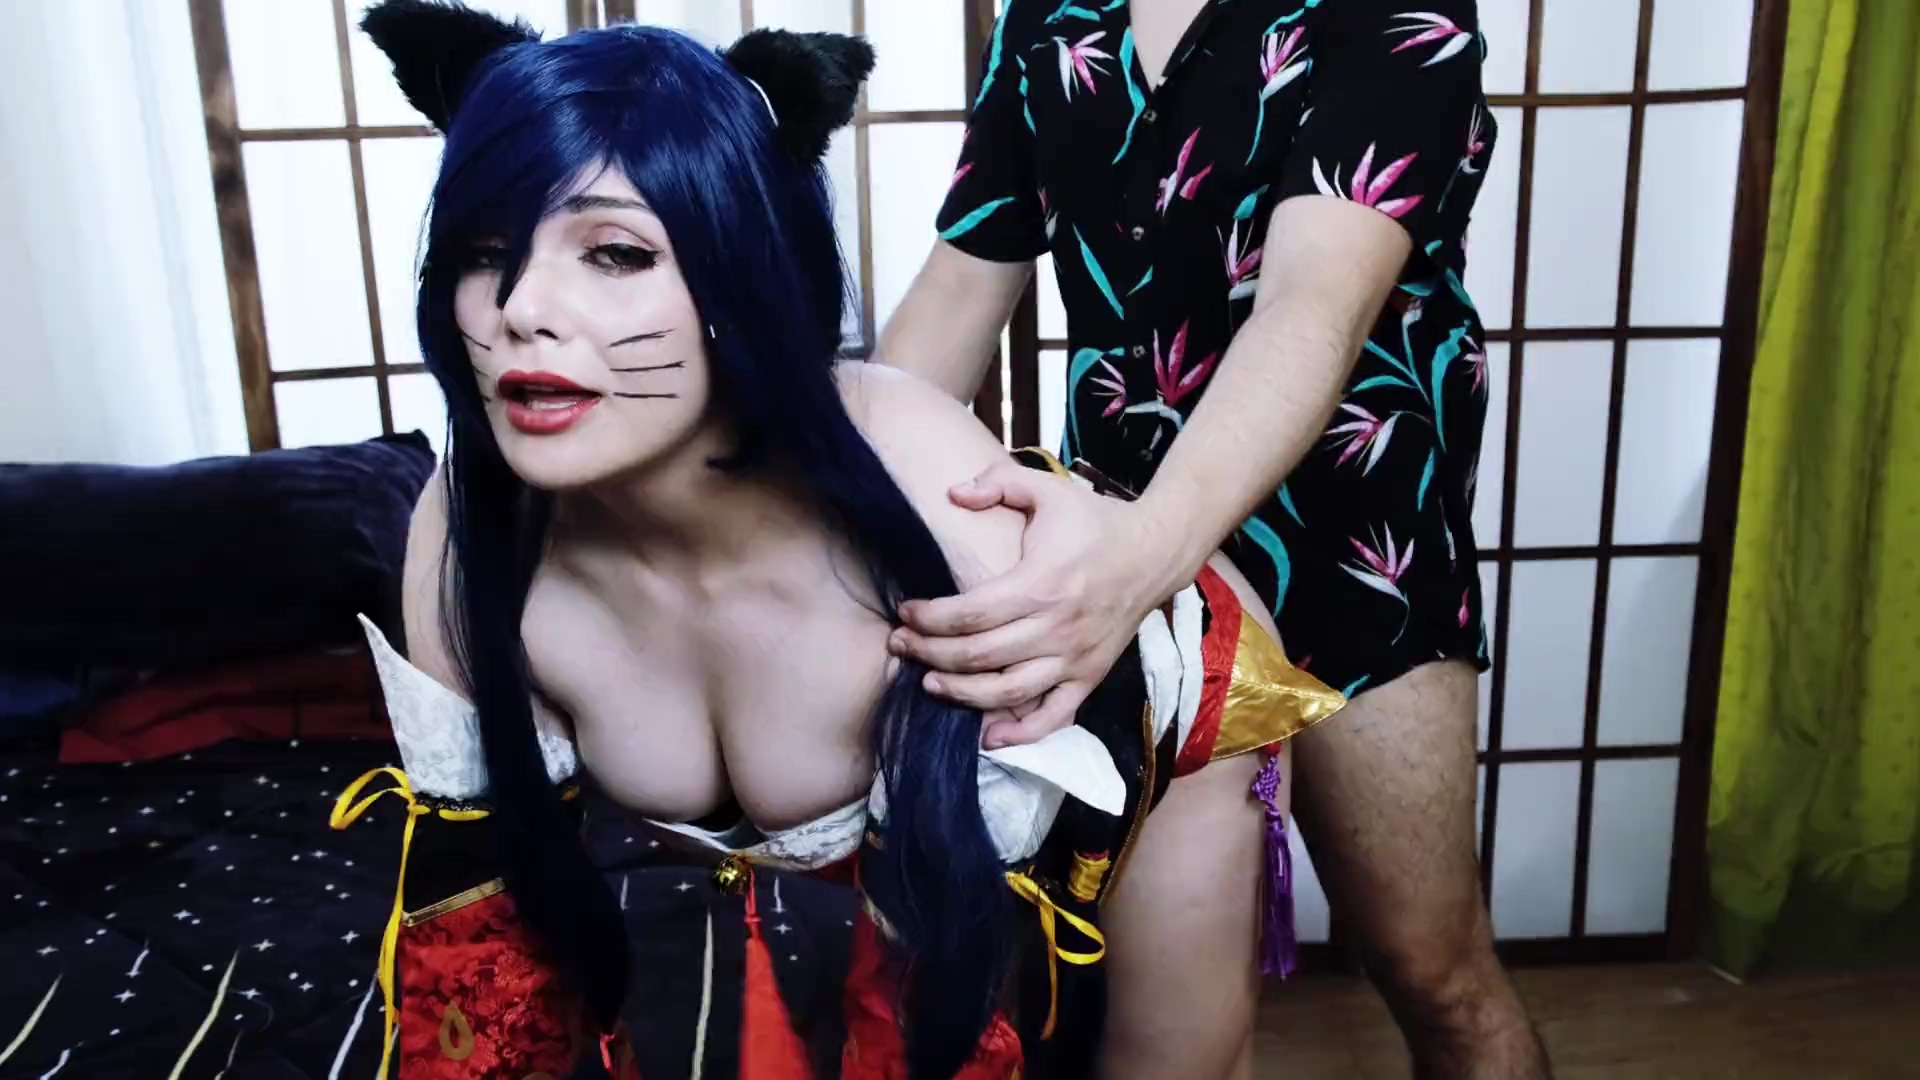 Sexiest League Of Legends Cosplay Porn - Ahri League of Legends cosplay - Real Amateur